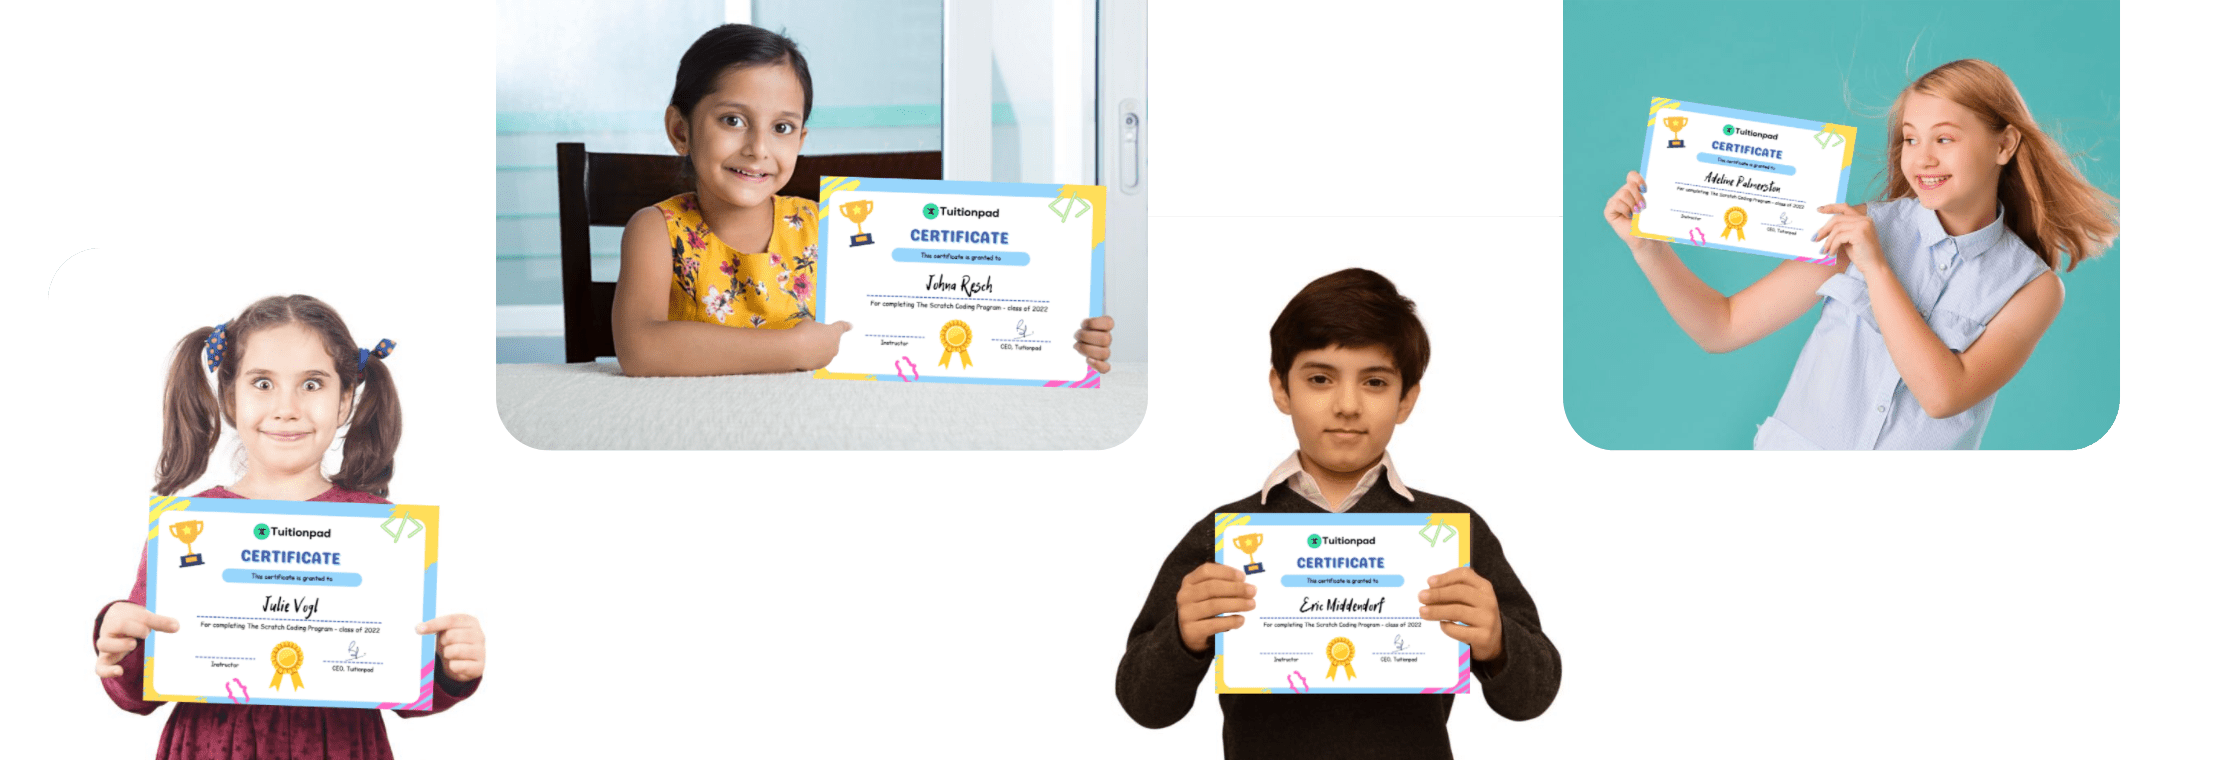 coding certificates for kids